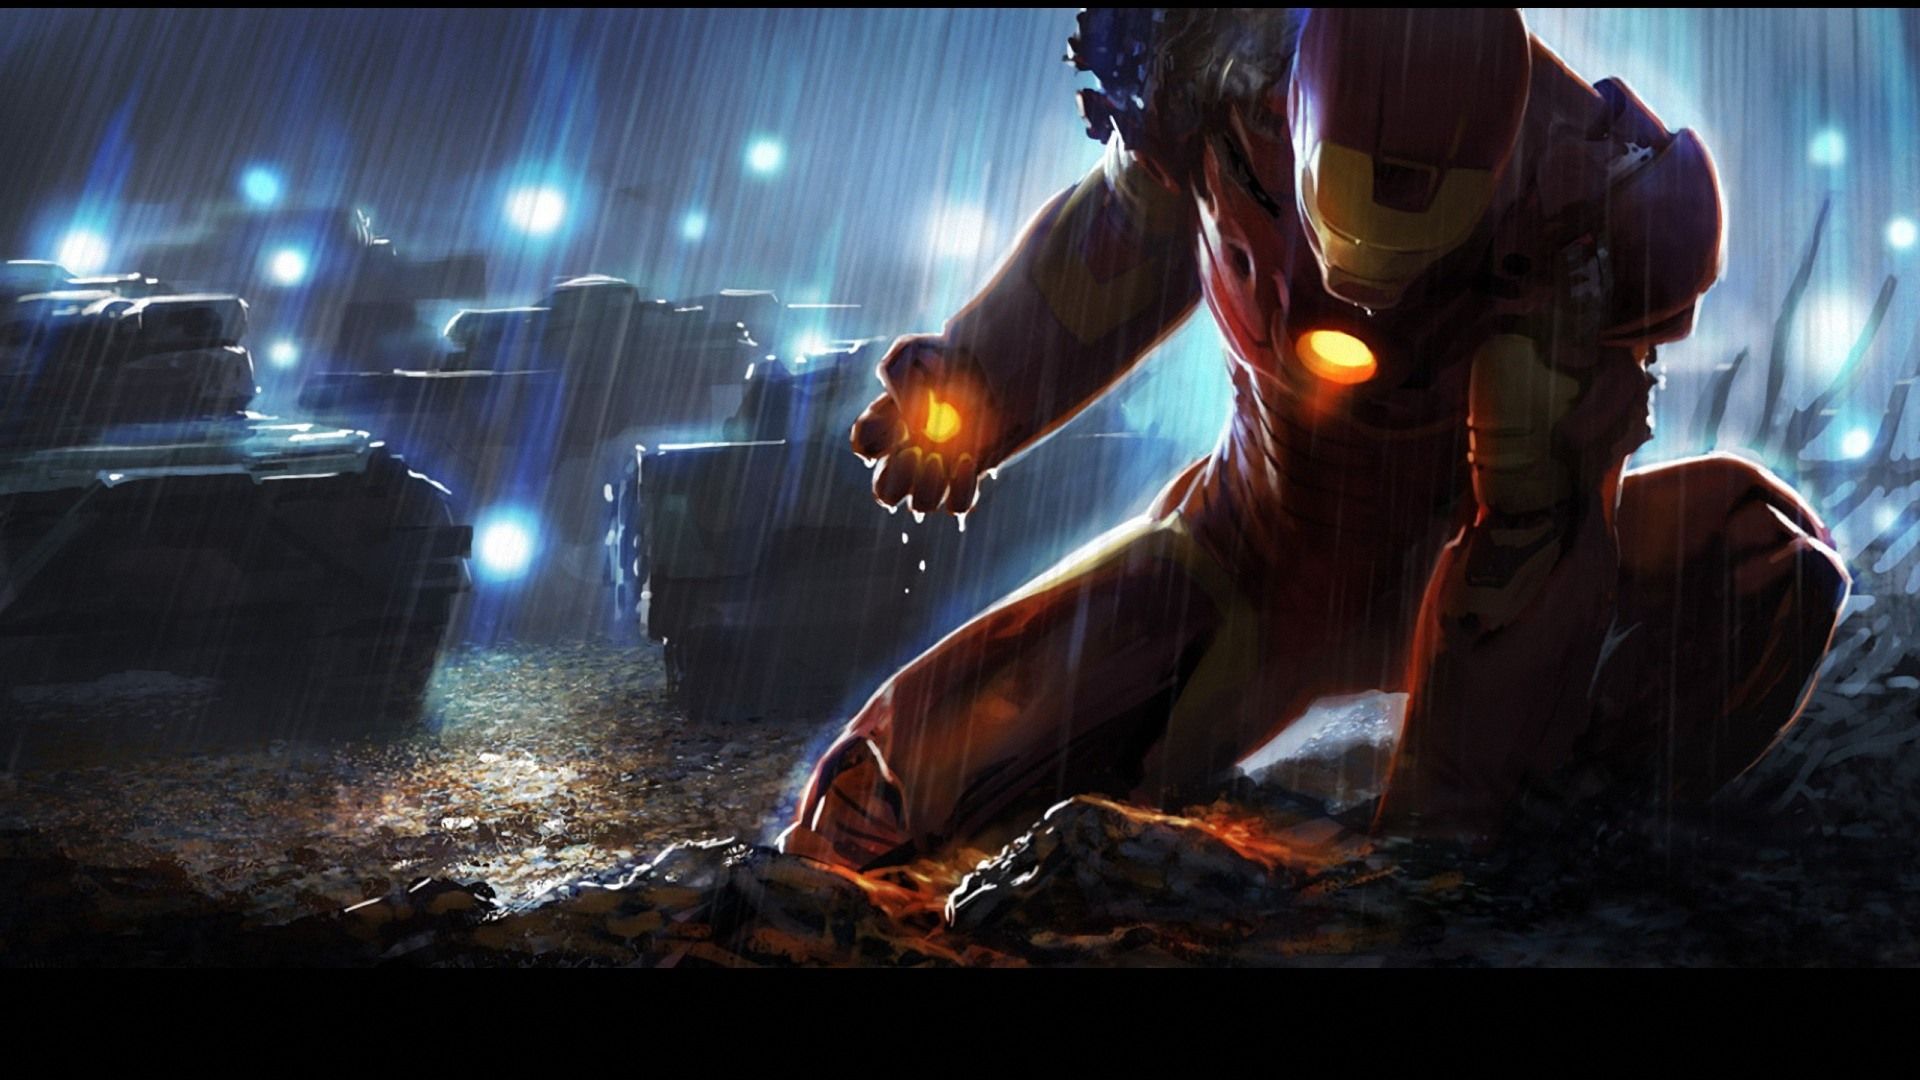 Iron Man power control 1920x1080 Wallpapers, 1920x1080 Wallpapers